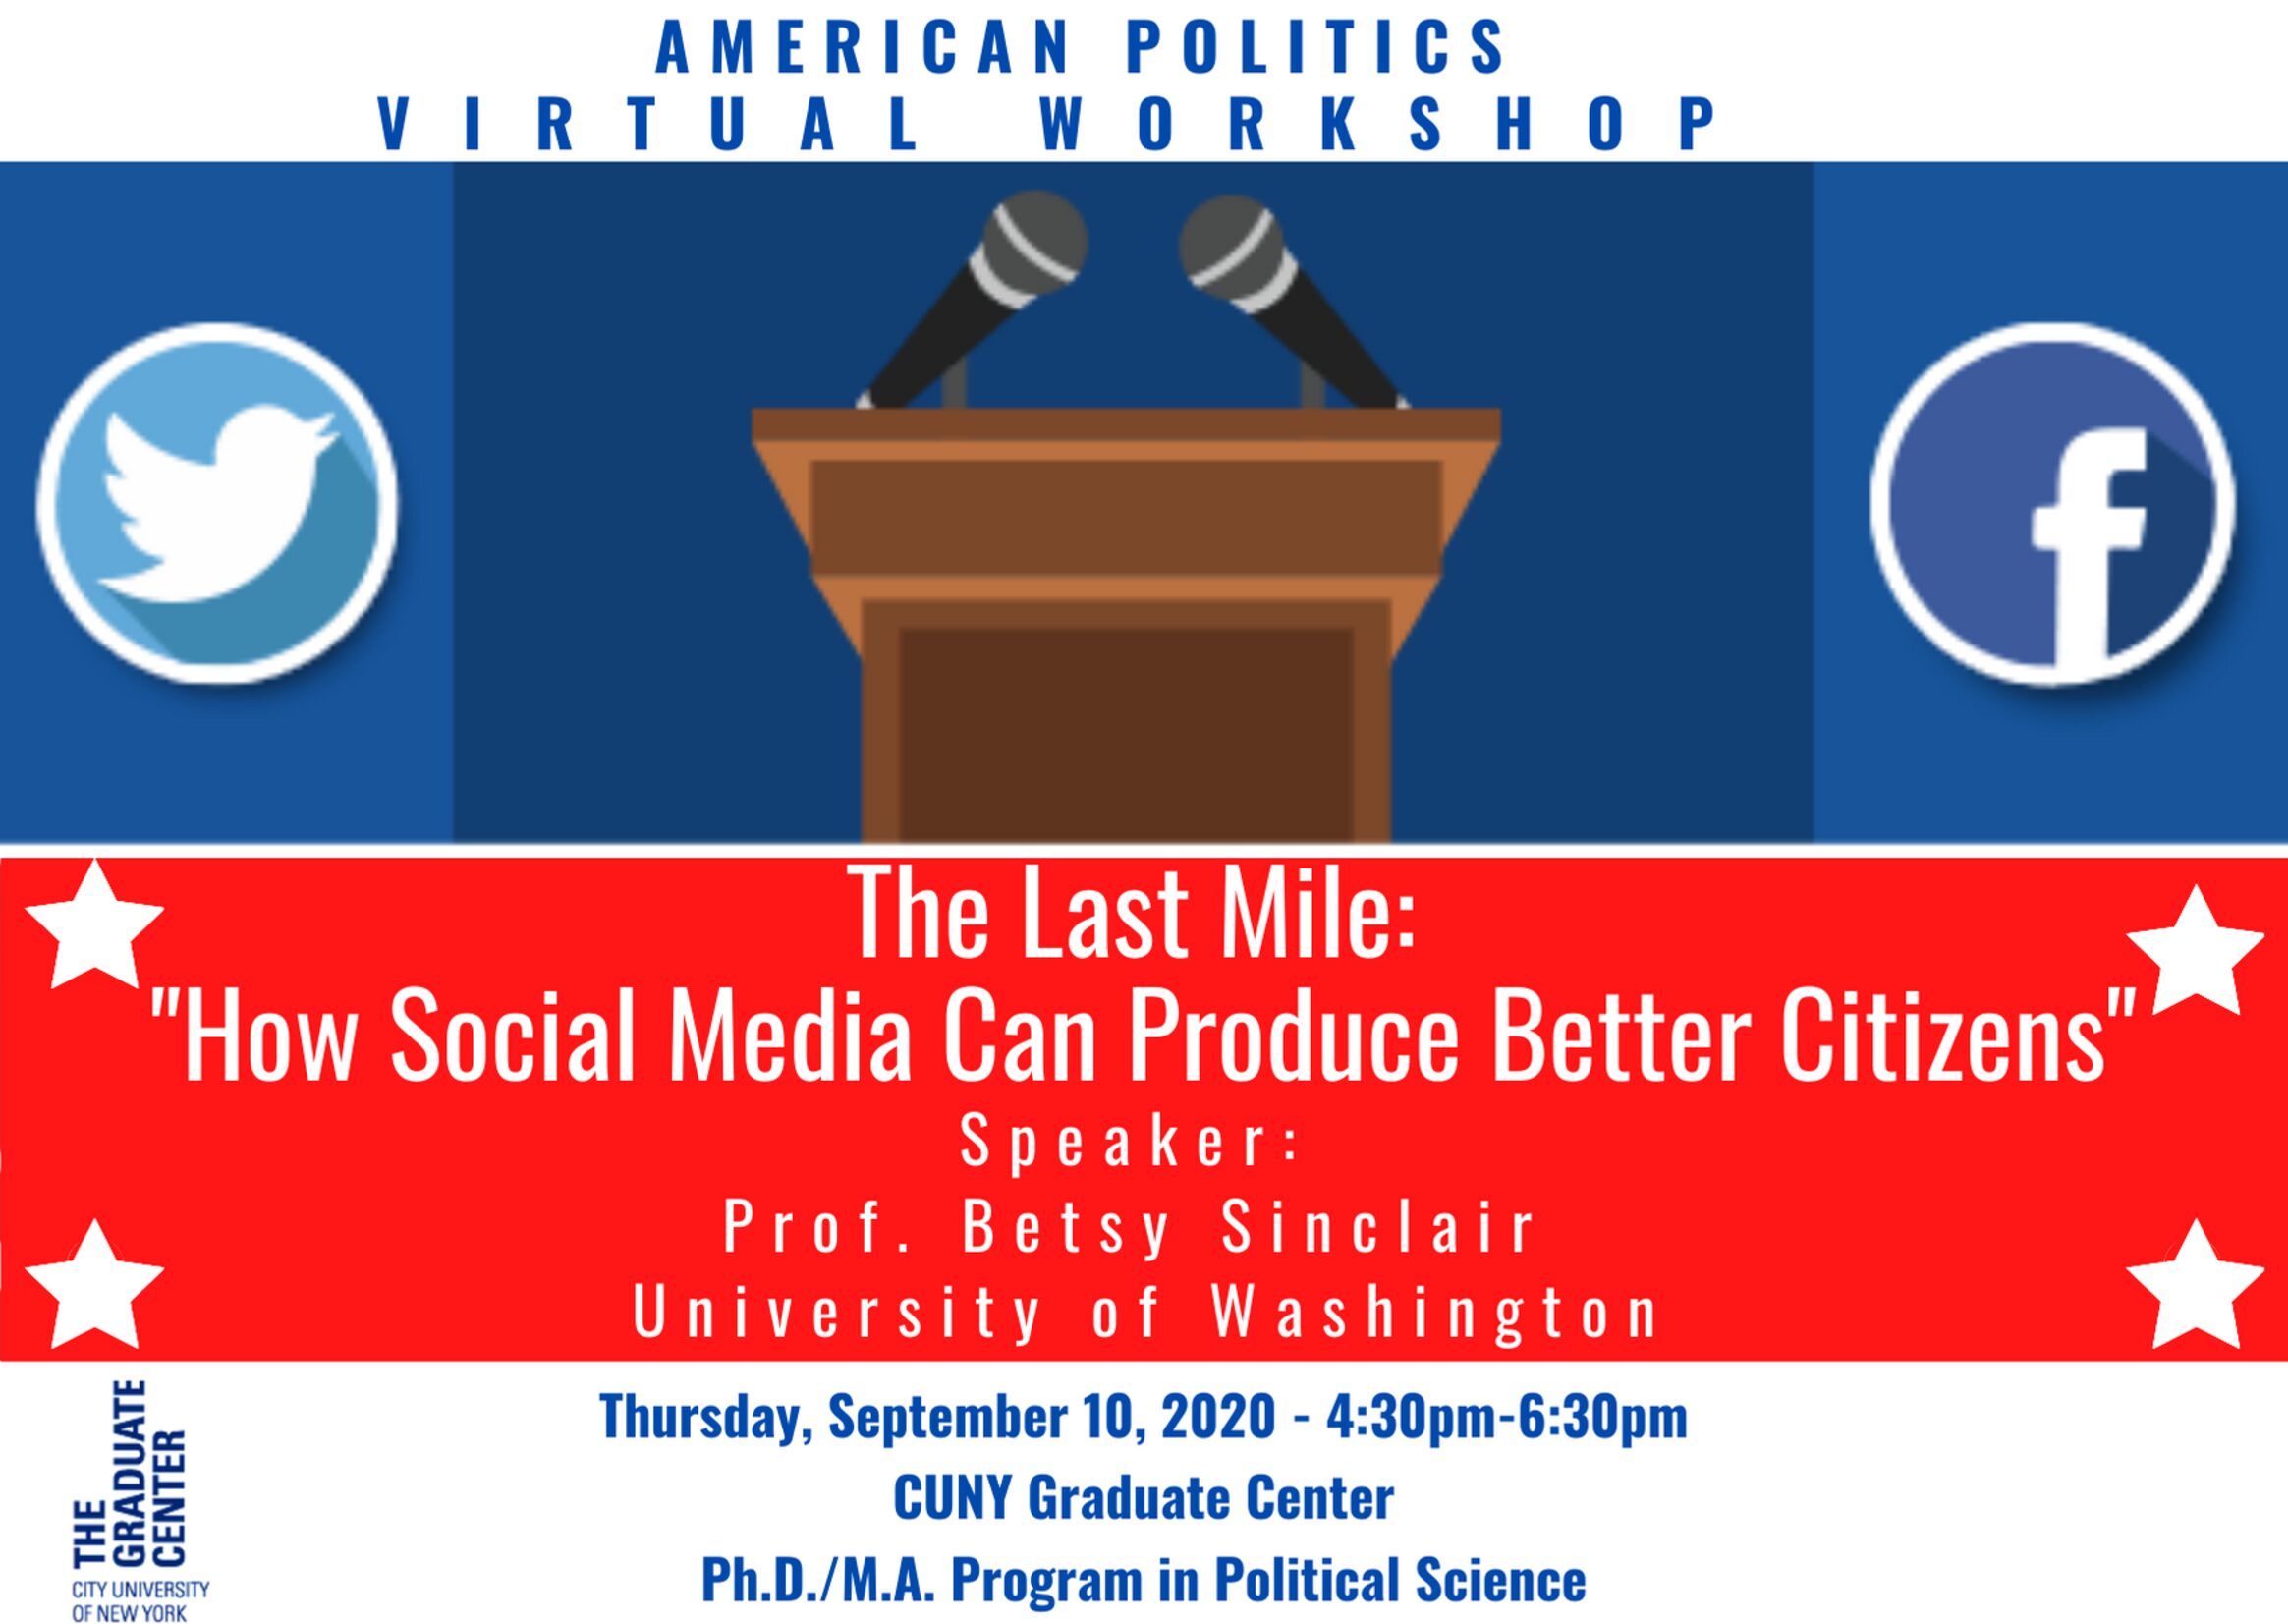 Election Series: Betsy Sinclair, "The Last Mile: How Social Media Can Produce Better Citizens" Thursday, September 10, 4:30-6:30pm